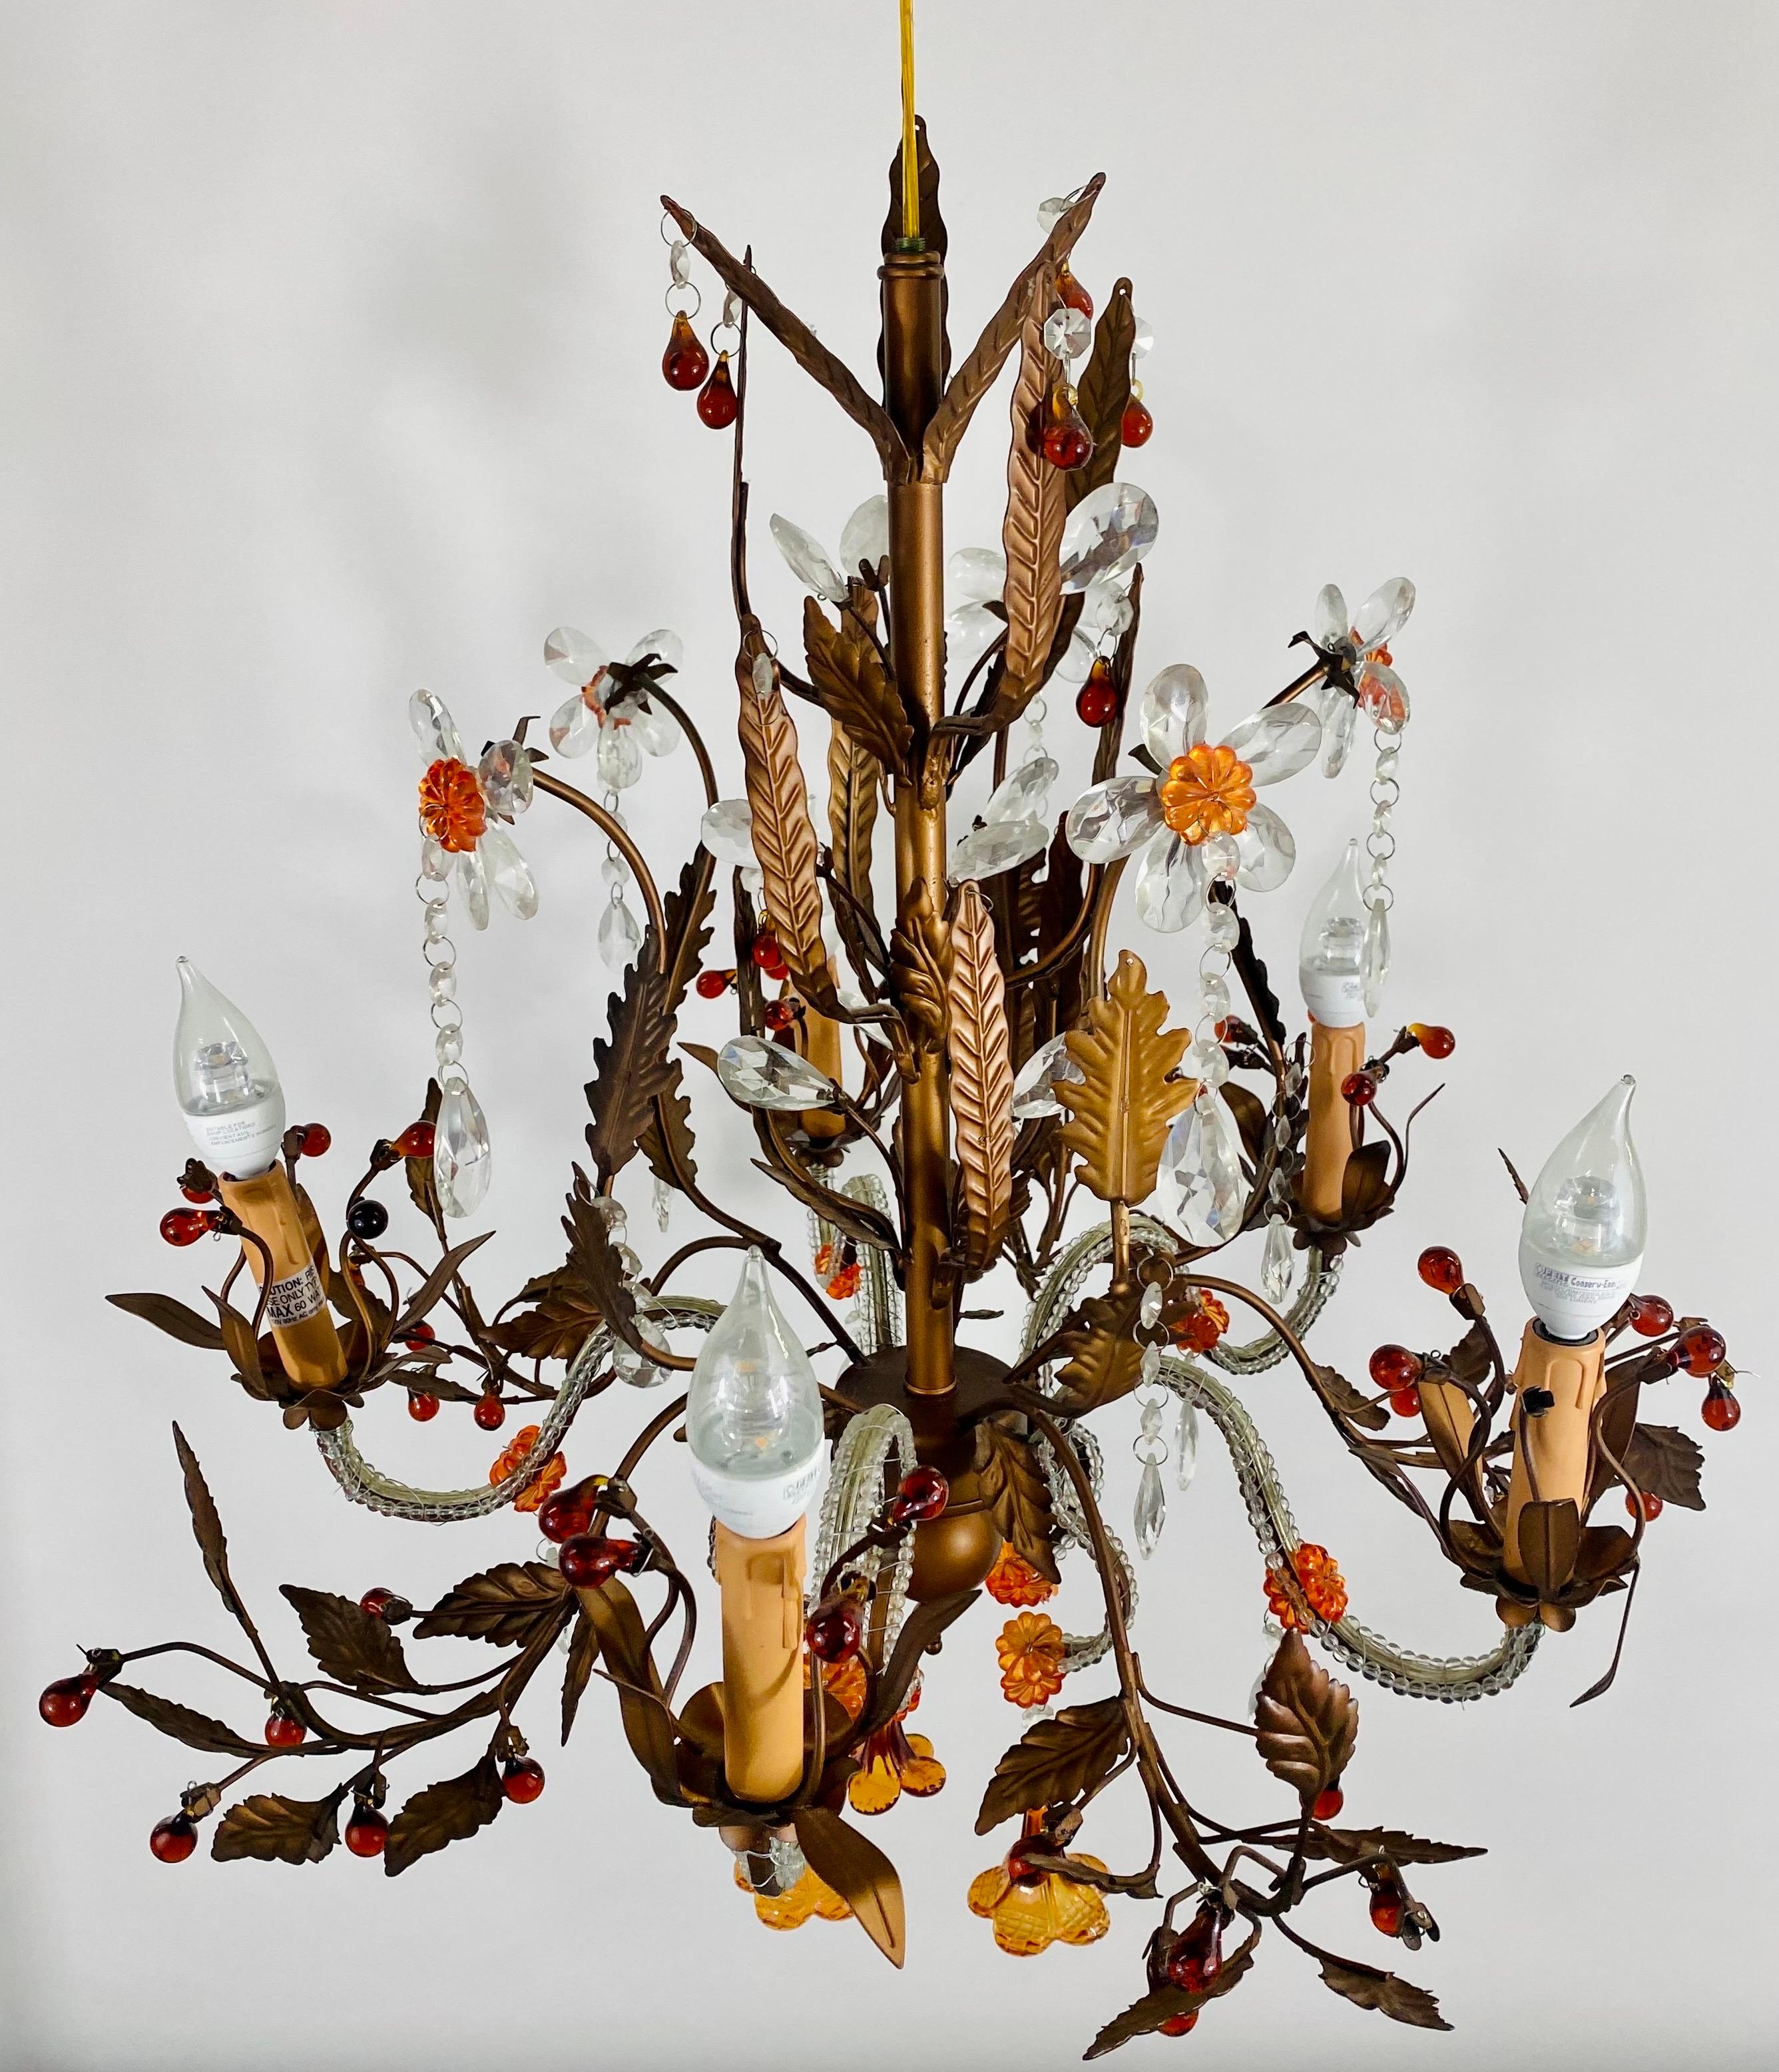 An exquisite Boho chic 1970's tole metal chandelier. The chandelier features faux crystal white lilies land orange flowers embellishing the leaves design of the chandelier painted in brown. The arms are elegantly covered in beads adding style to